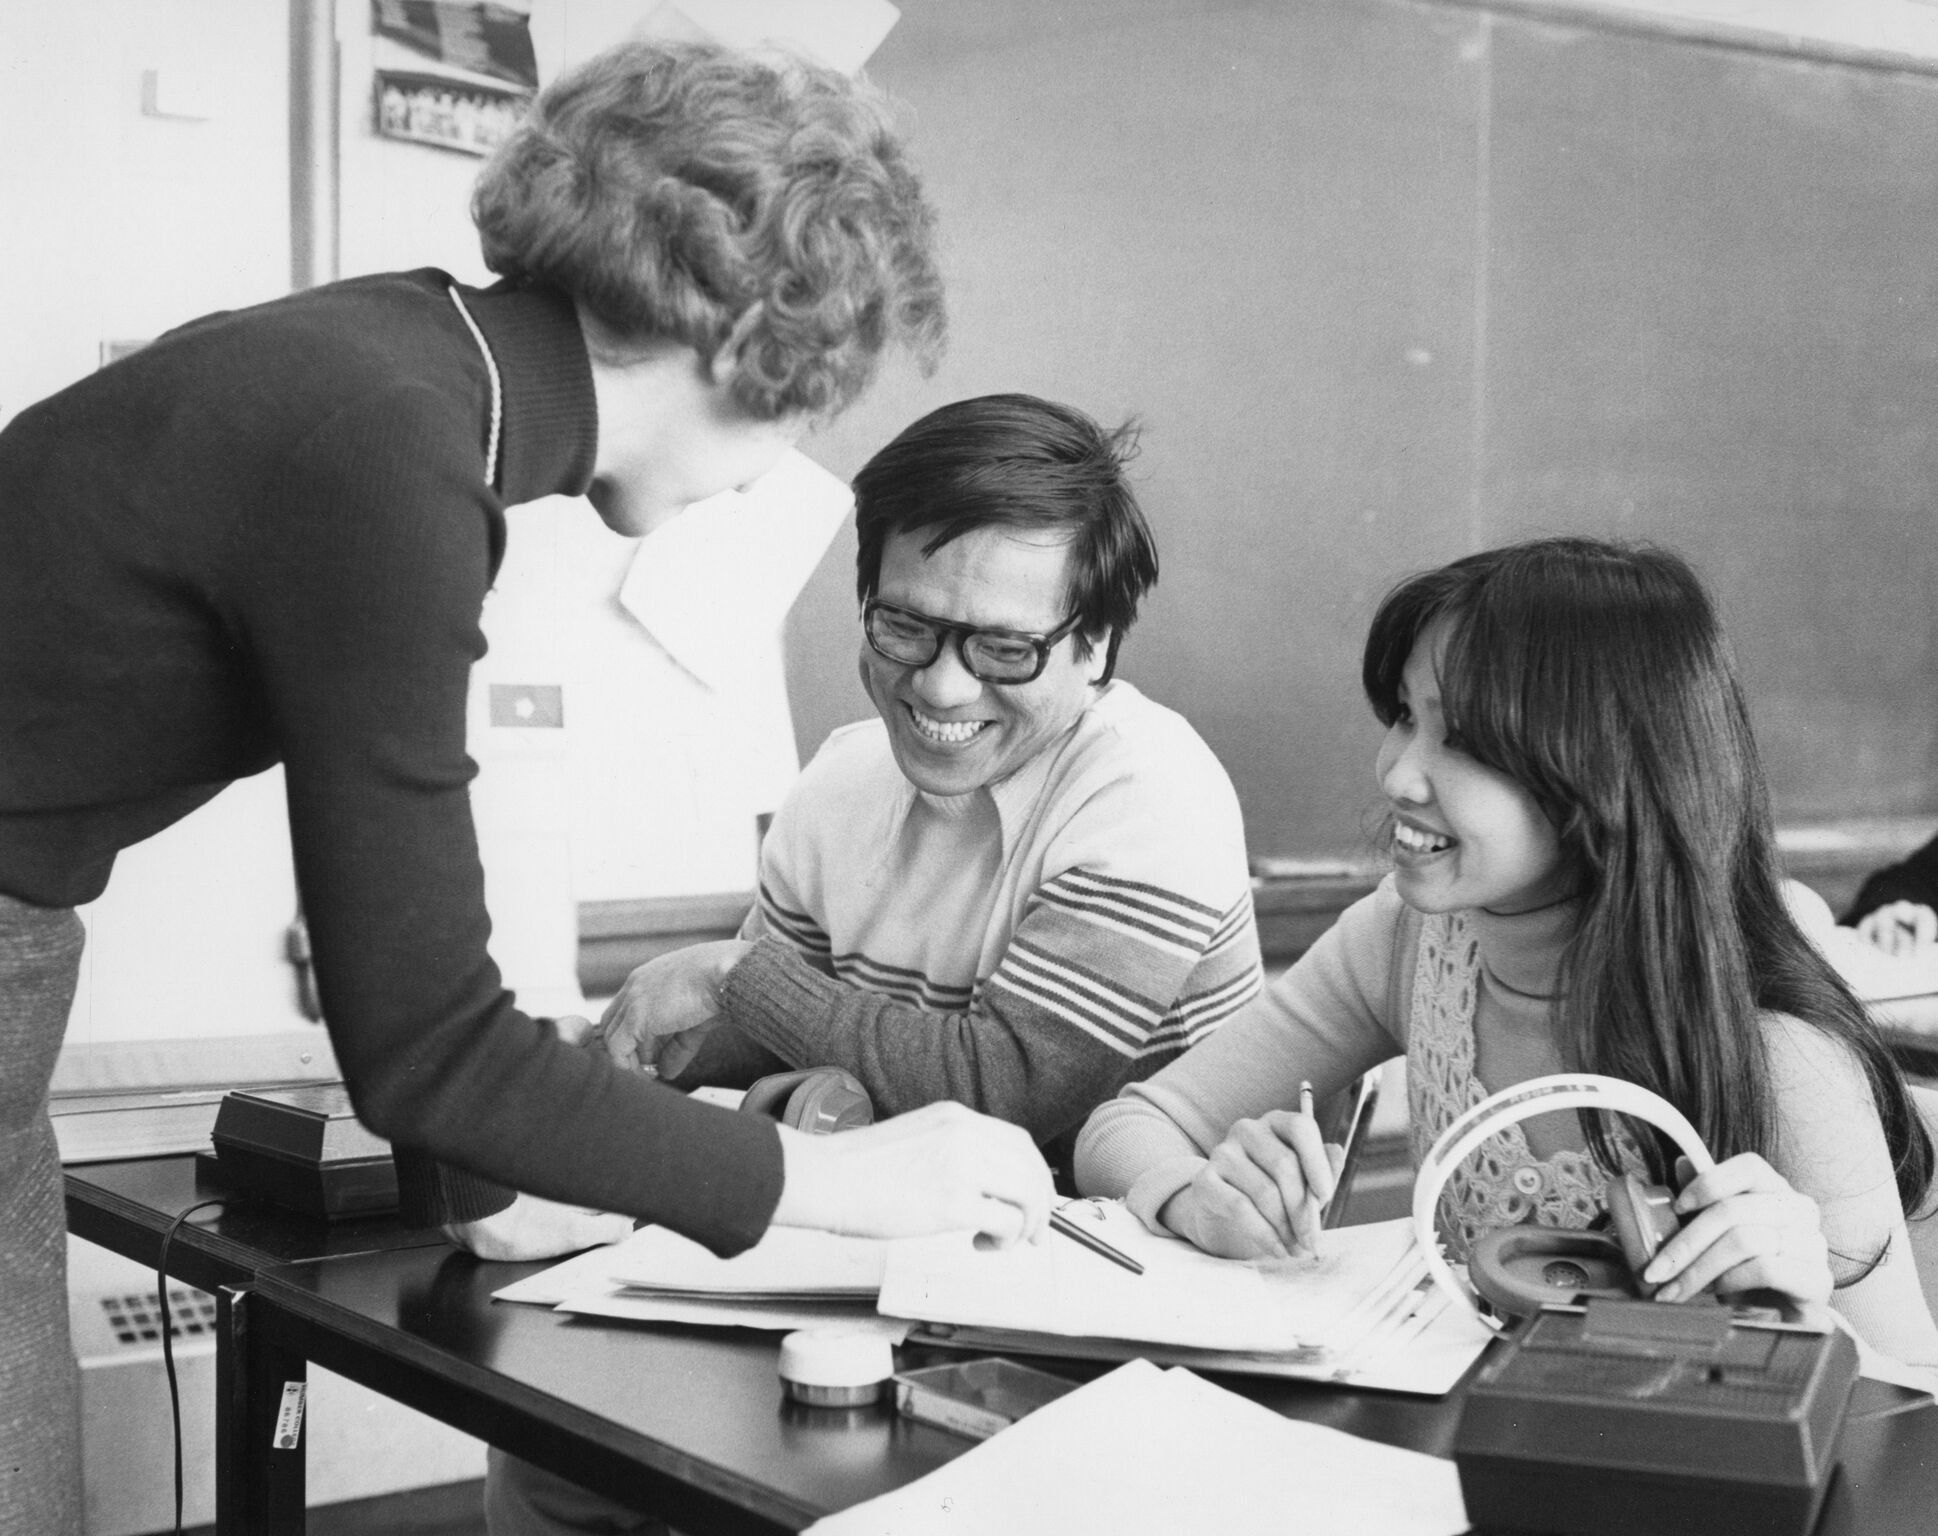 1970s- A faculty member works with International students in an English as a Second Language classroom. Notice the cassette tape players and headphones in the photo.